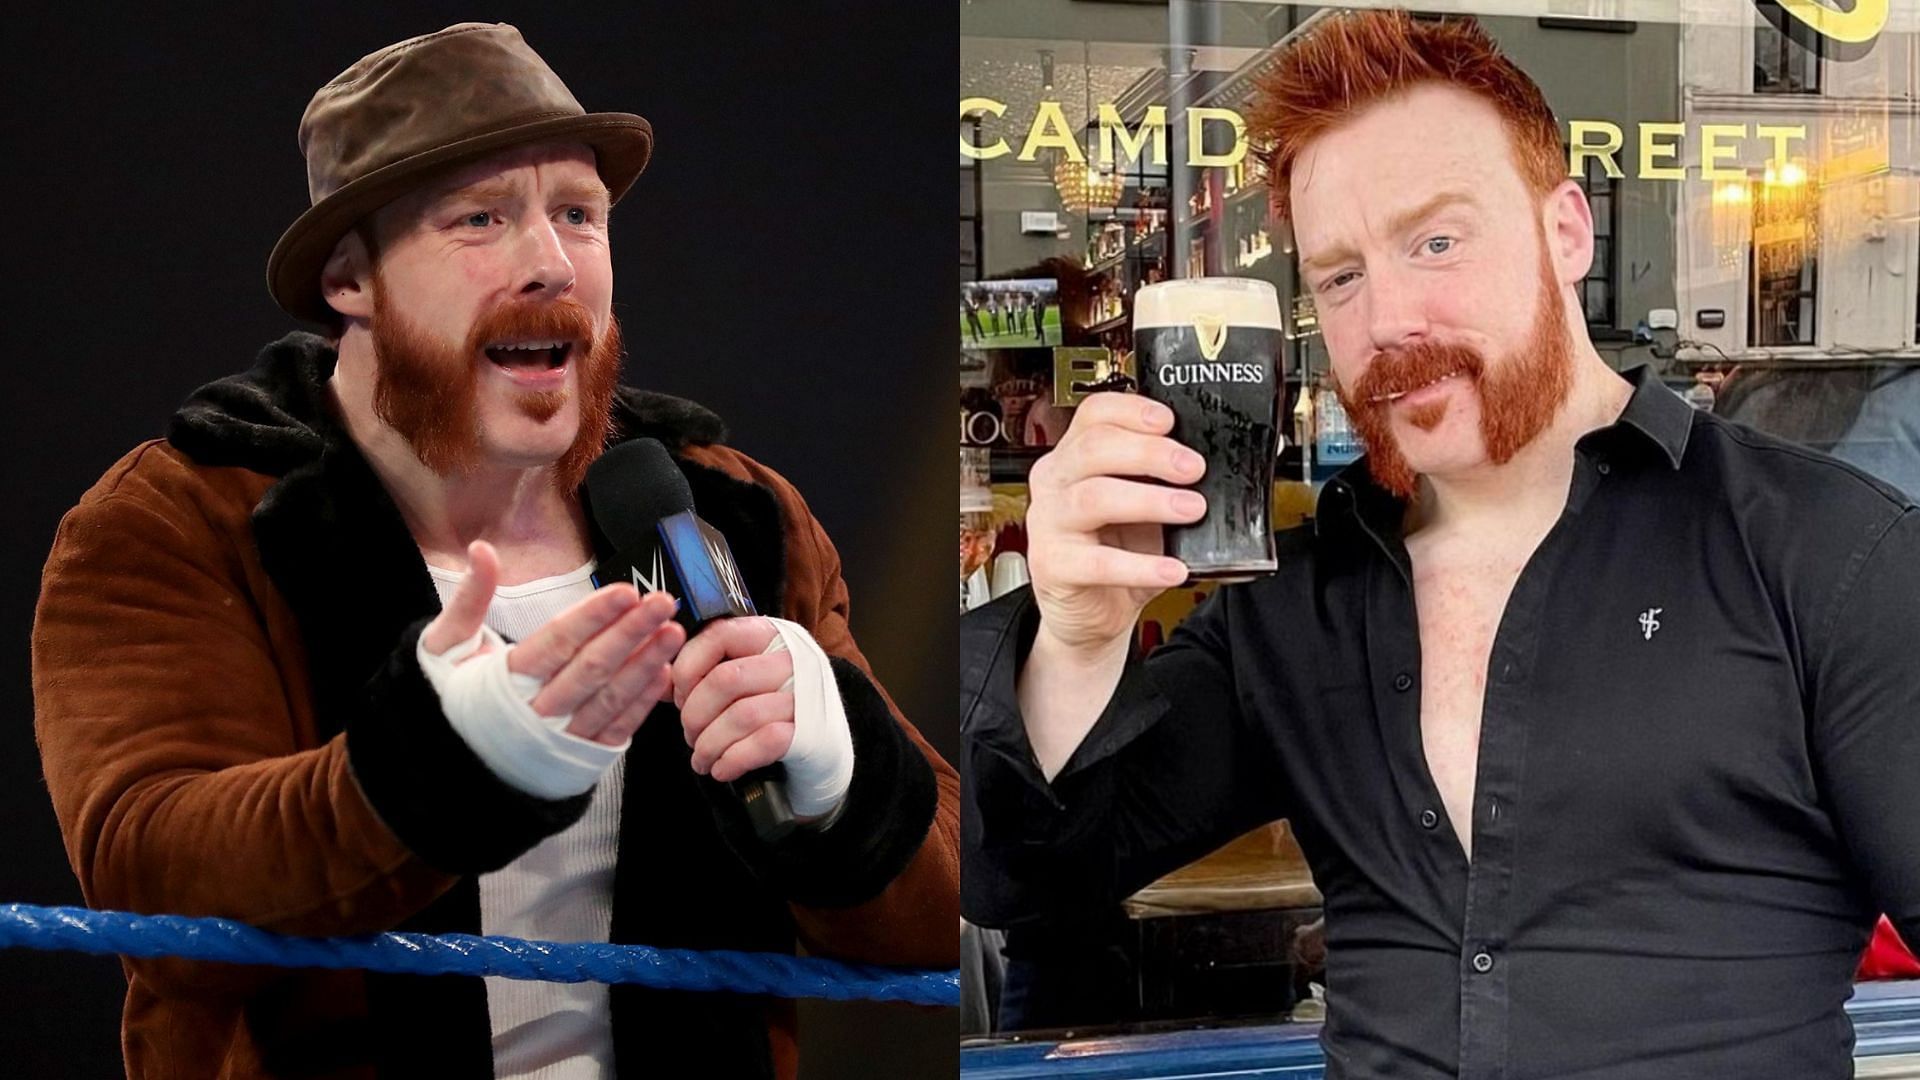 Sheamus is currently a part of the SmackDown roster.